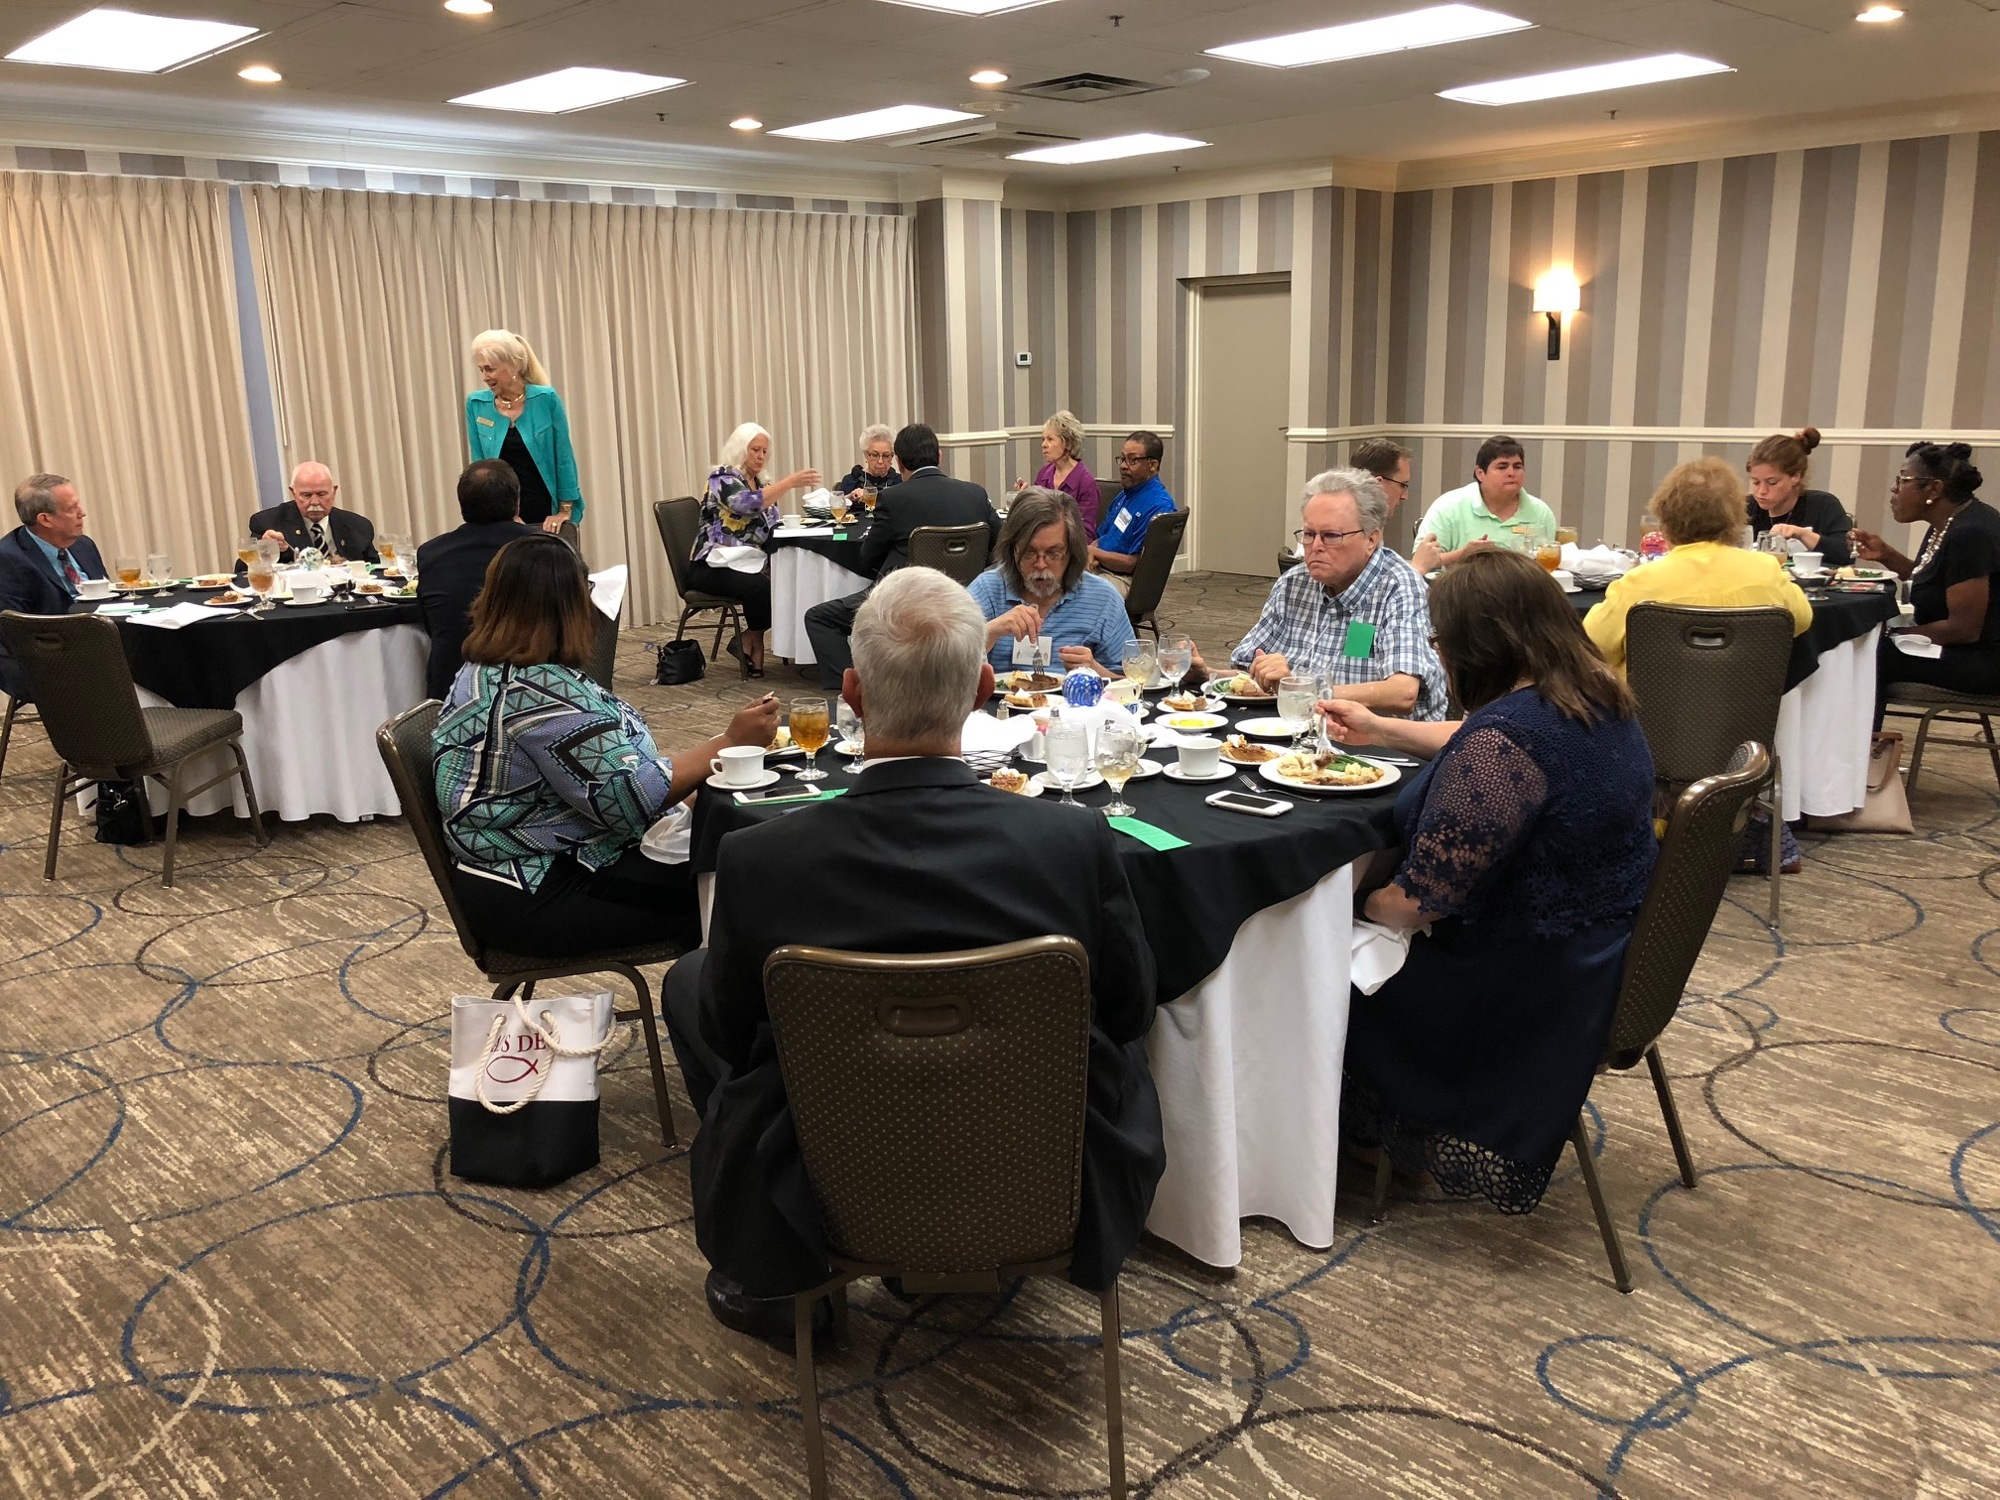 Members of the Jacksonville Civic Round Table held their final luncheon meeting May 11 at the DoubleTree by Hilton Hotel Jacksonville Riverfront on the Downtown Southbank.